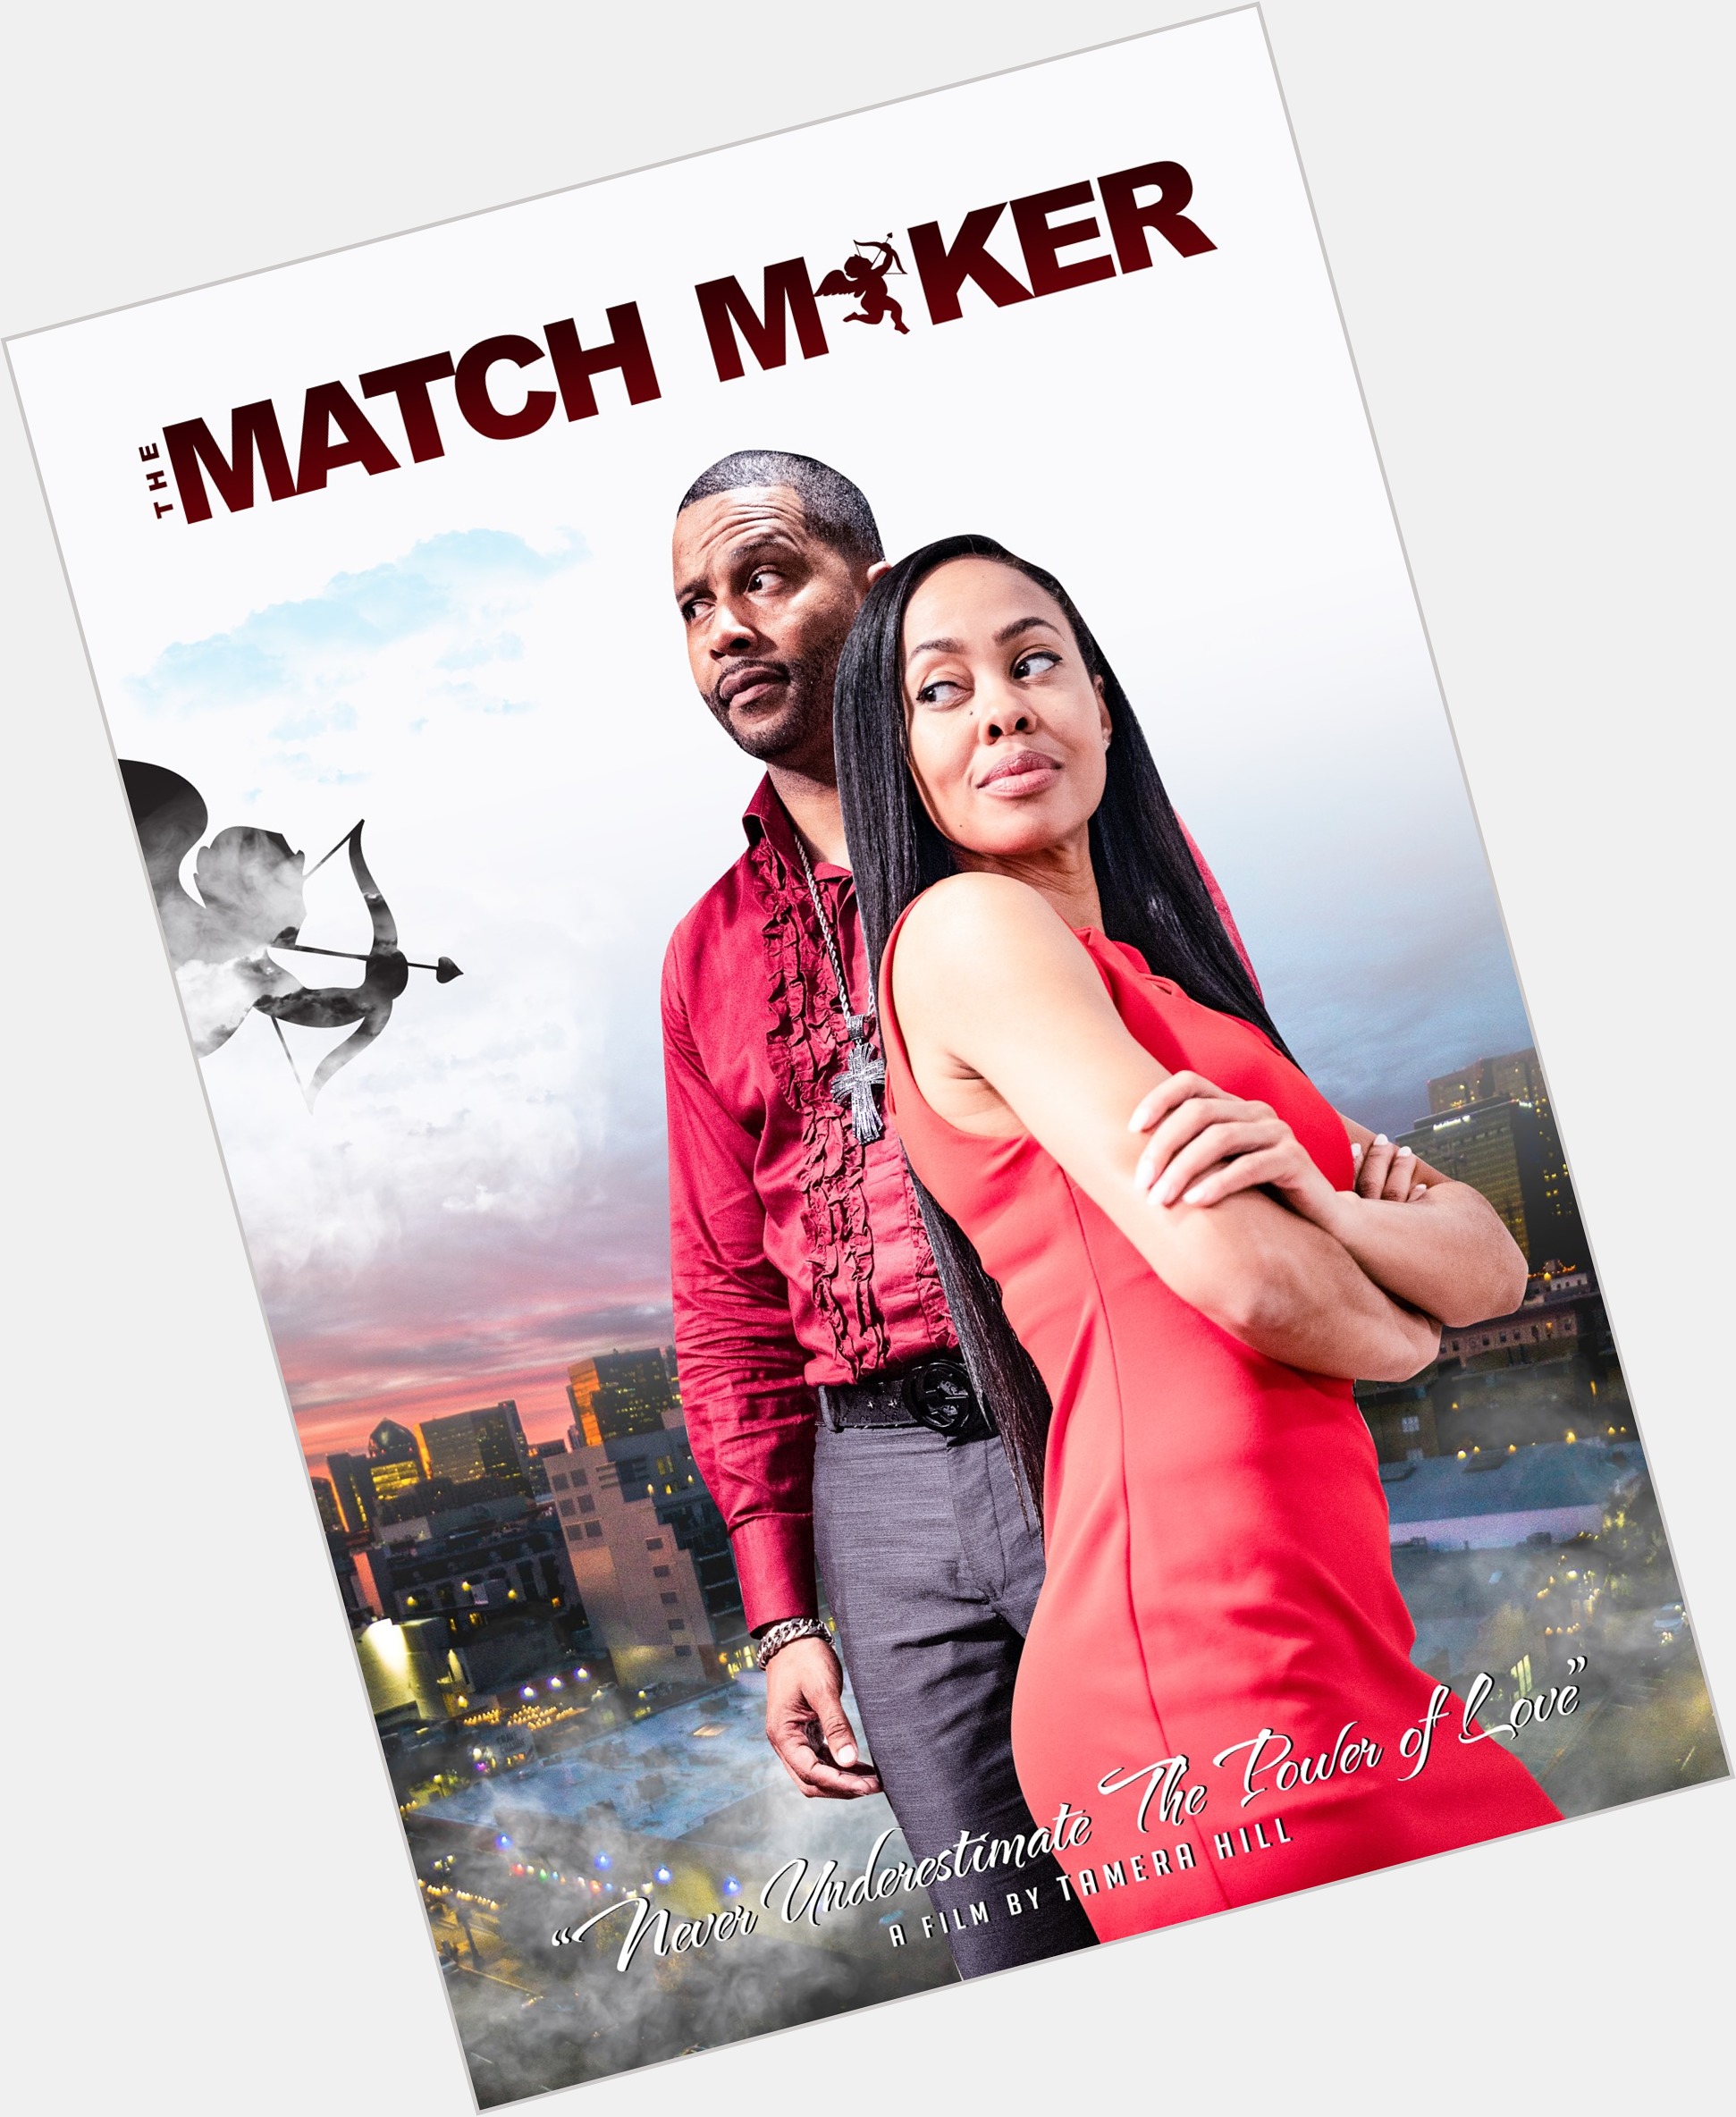 The Matchmaker Large body,  black hair & hairstyles